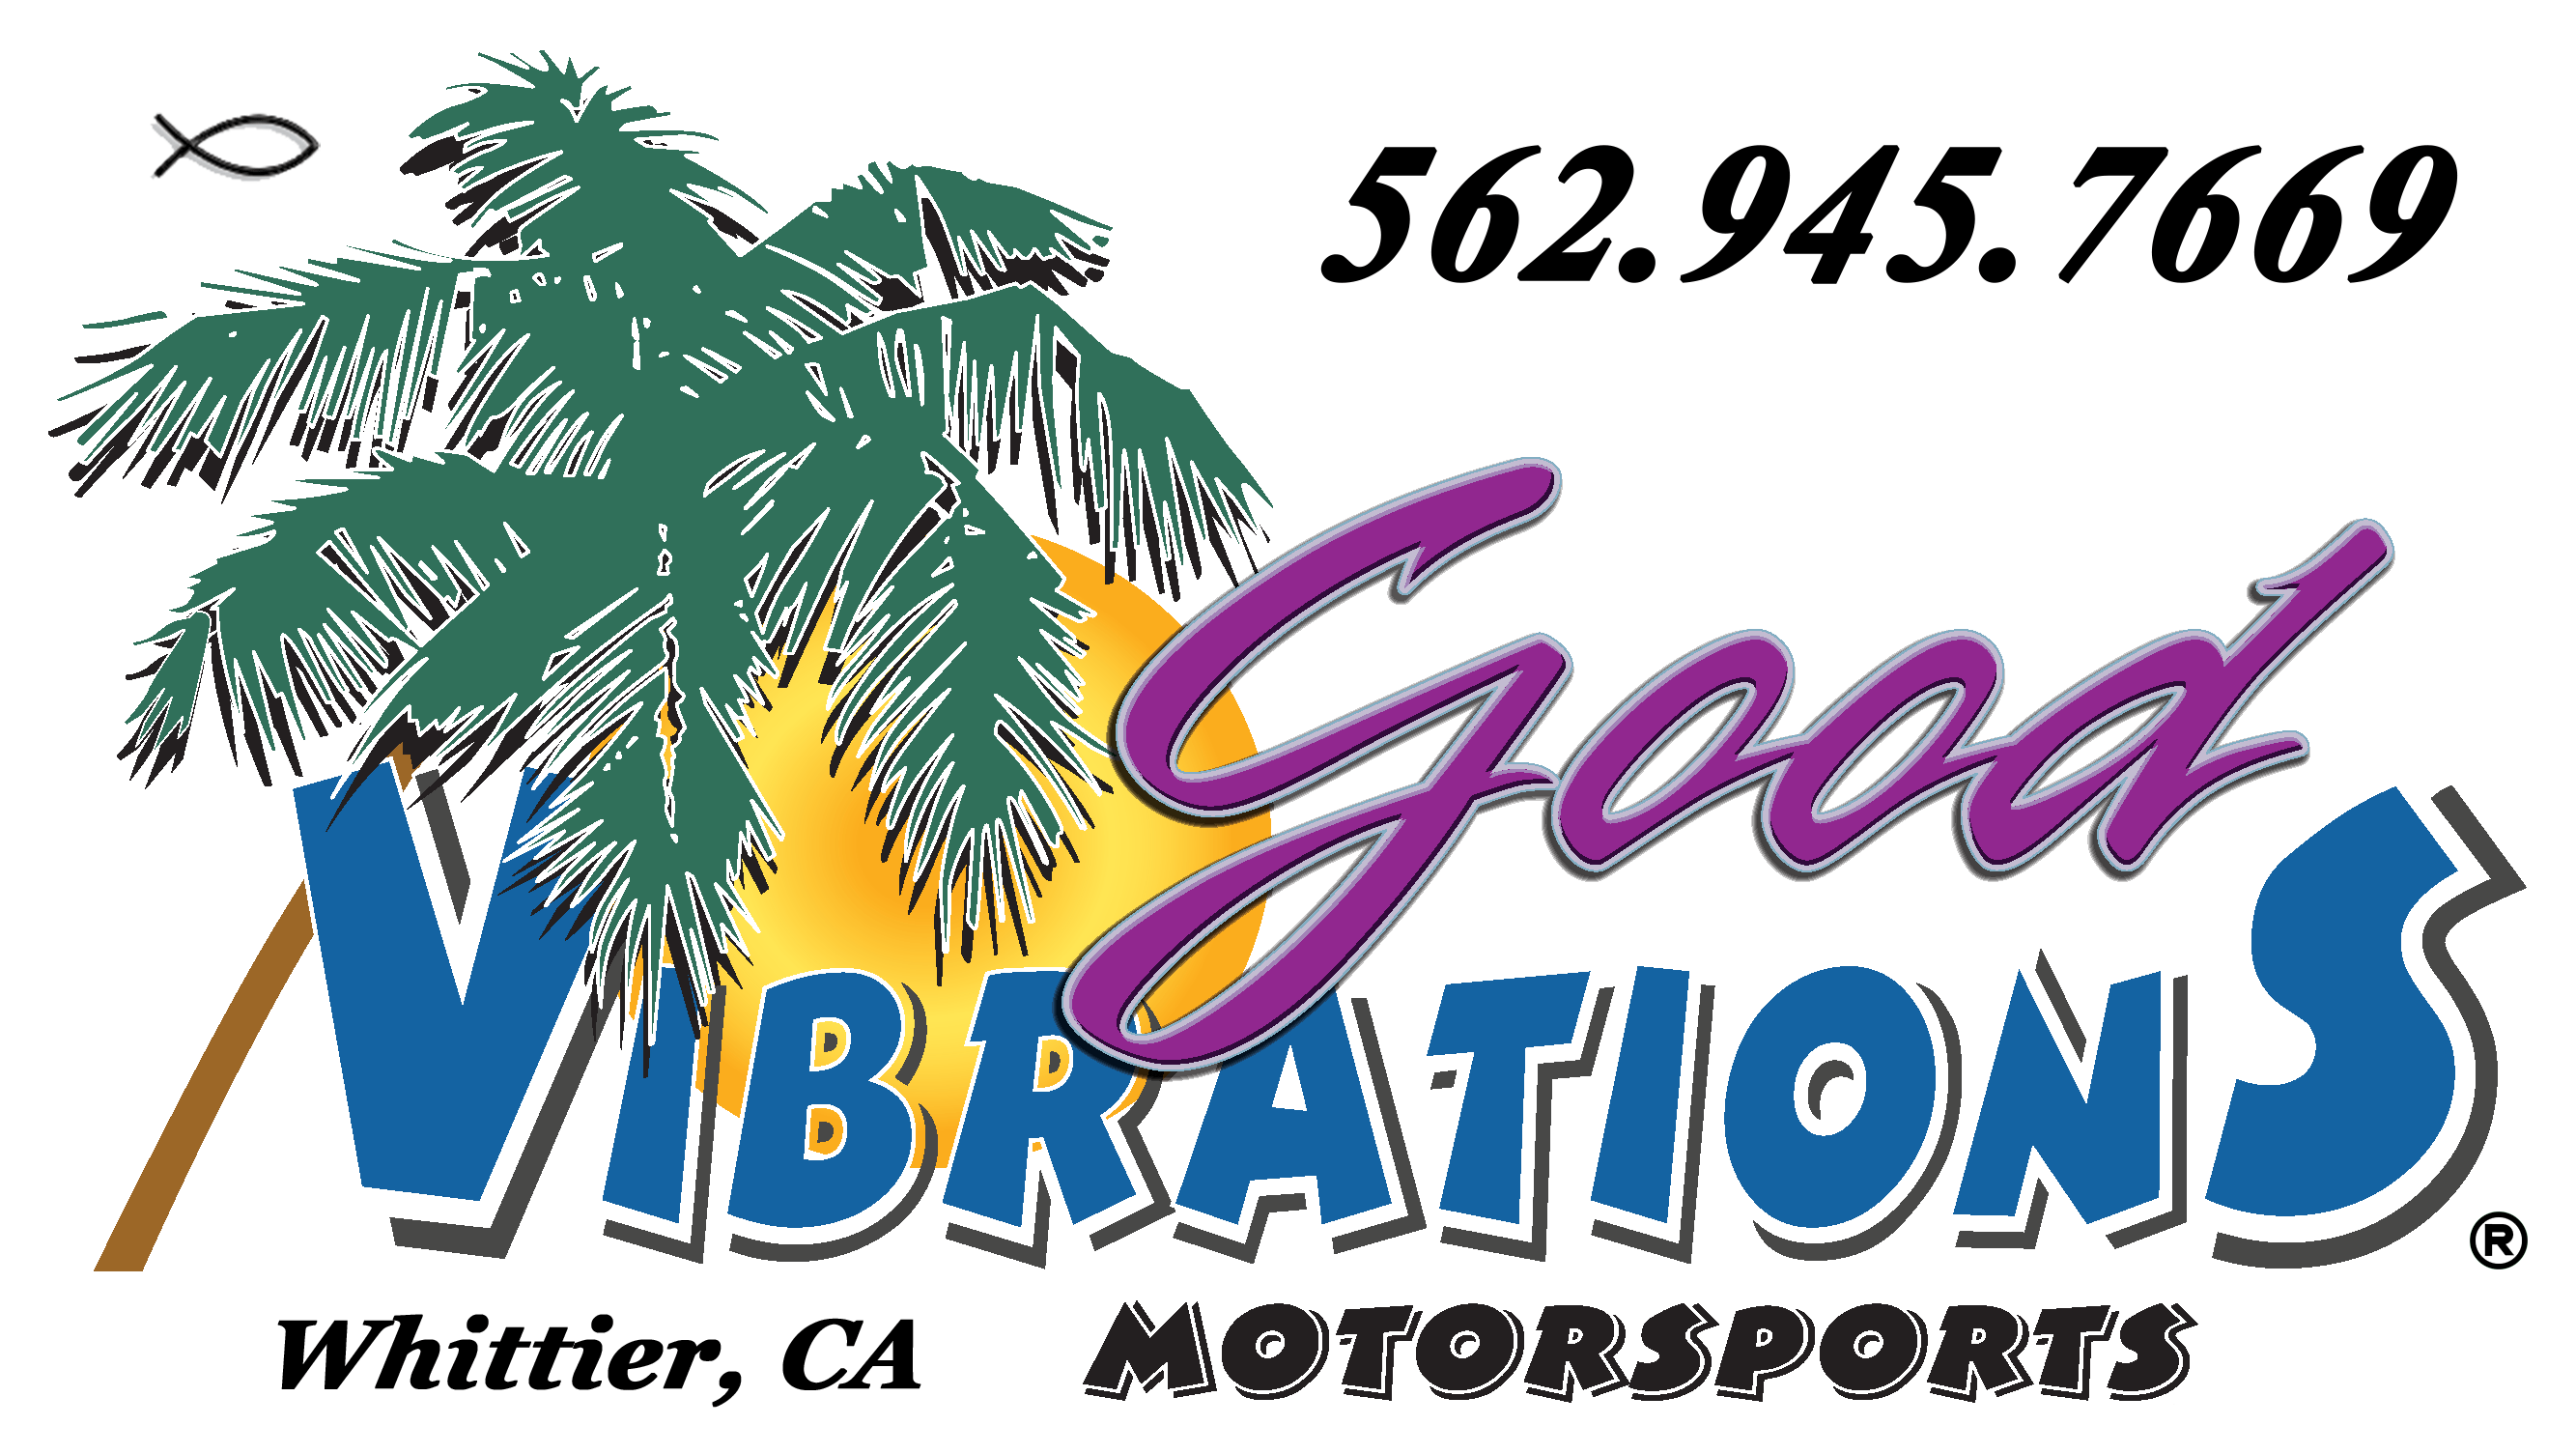 Good Vibrations Performance Products at Discounted Prices